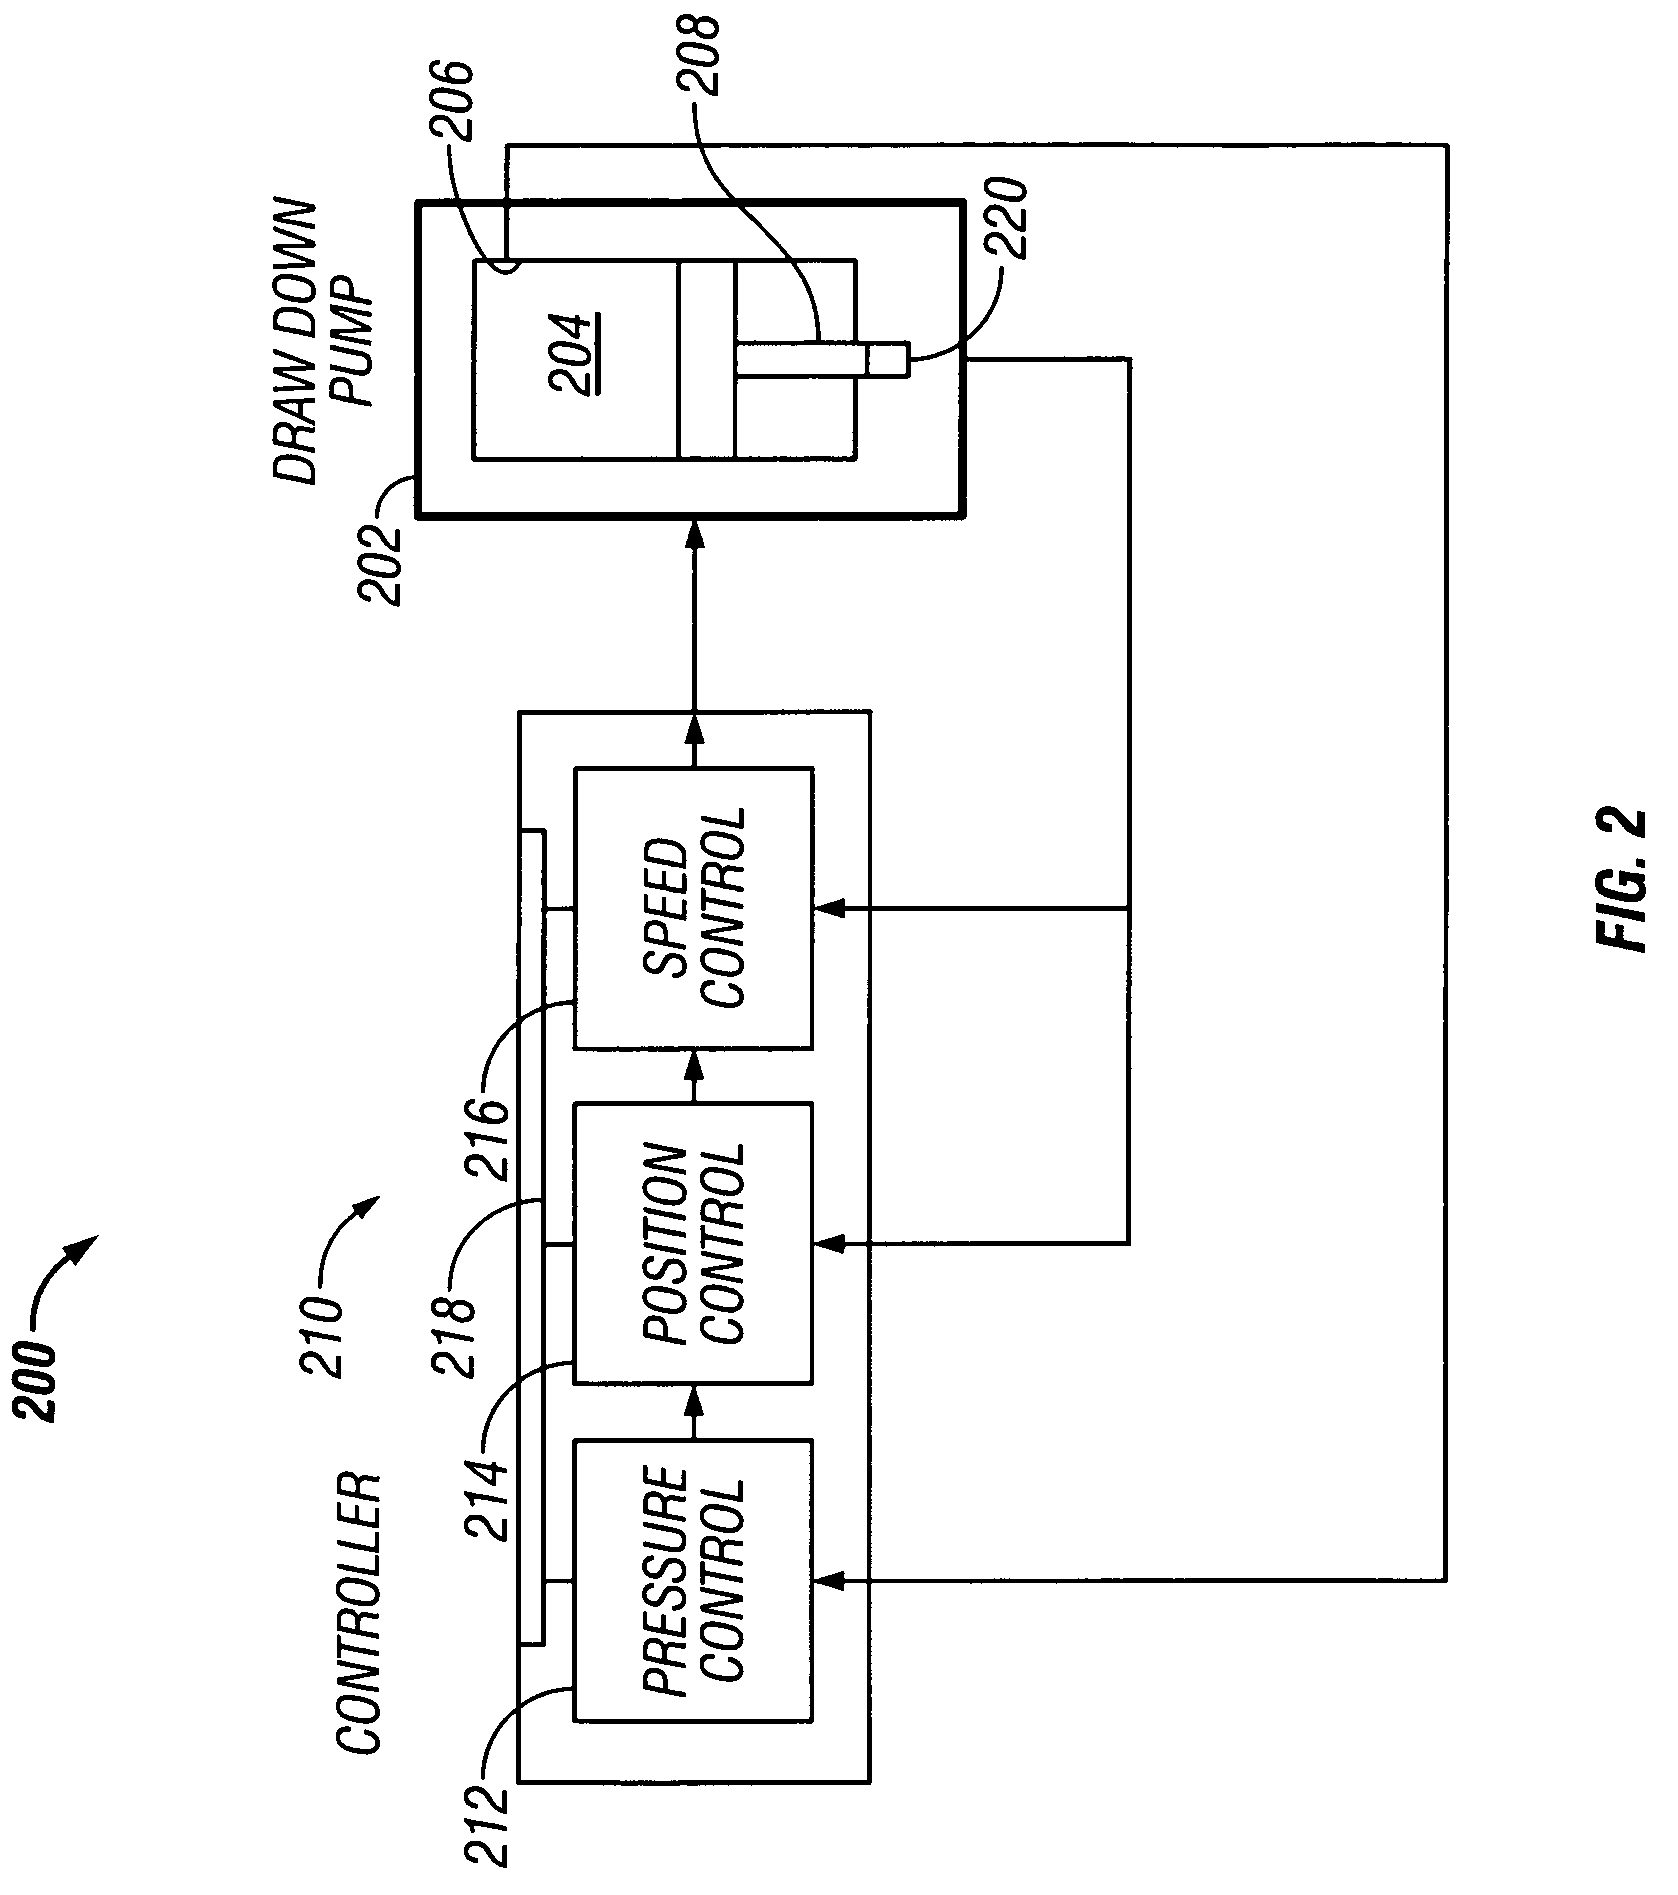 Formation testing apparatus and method for smooth draw down